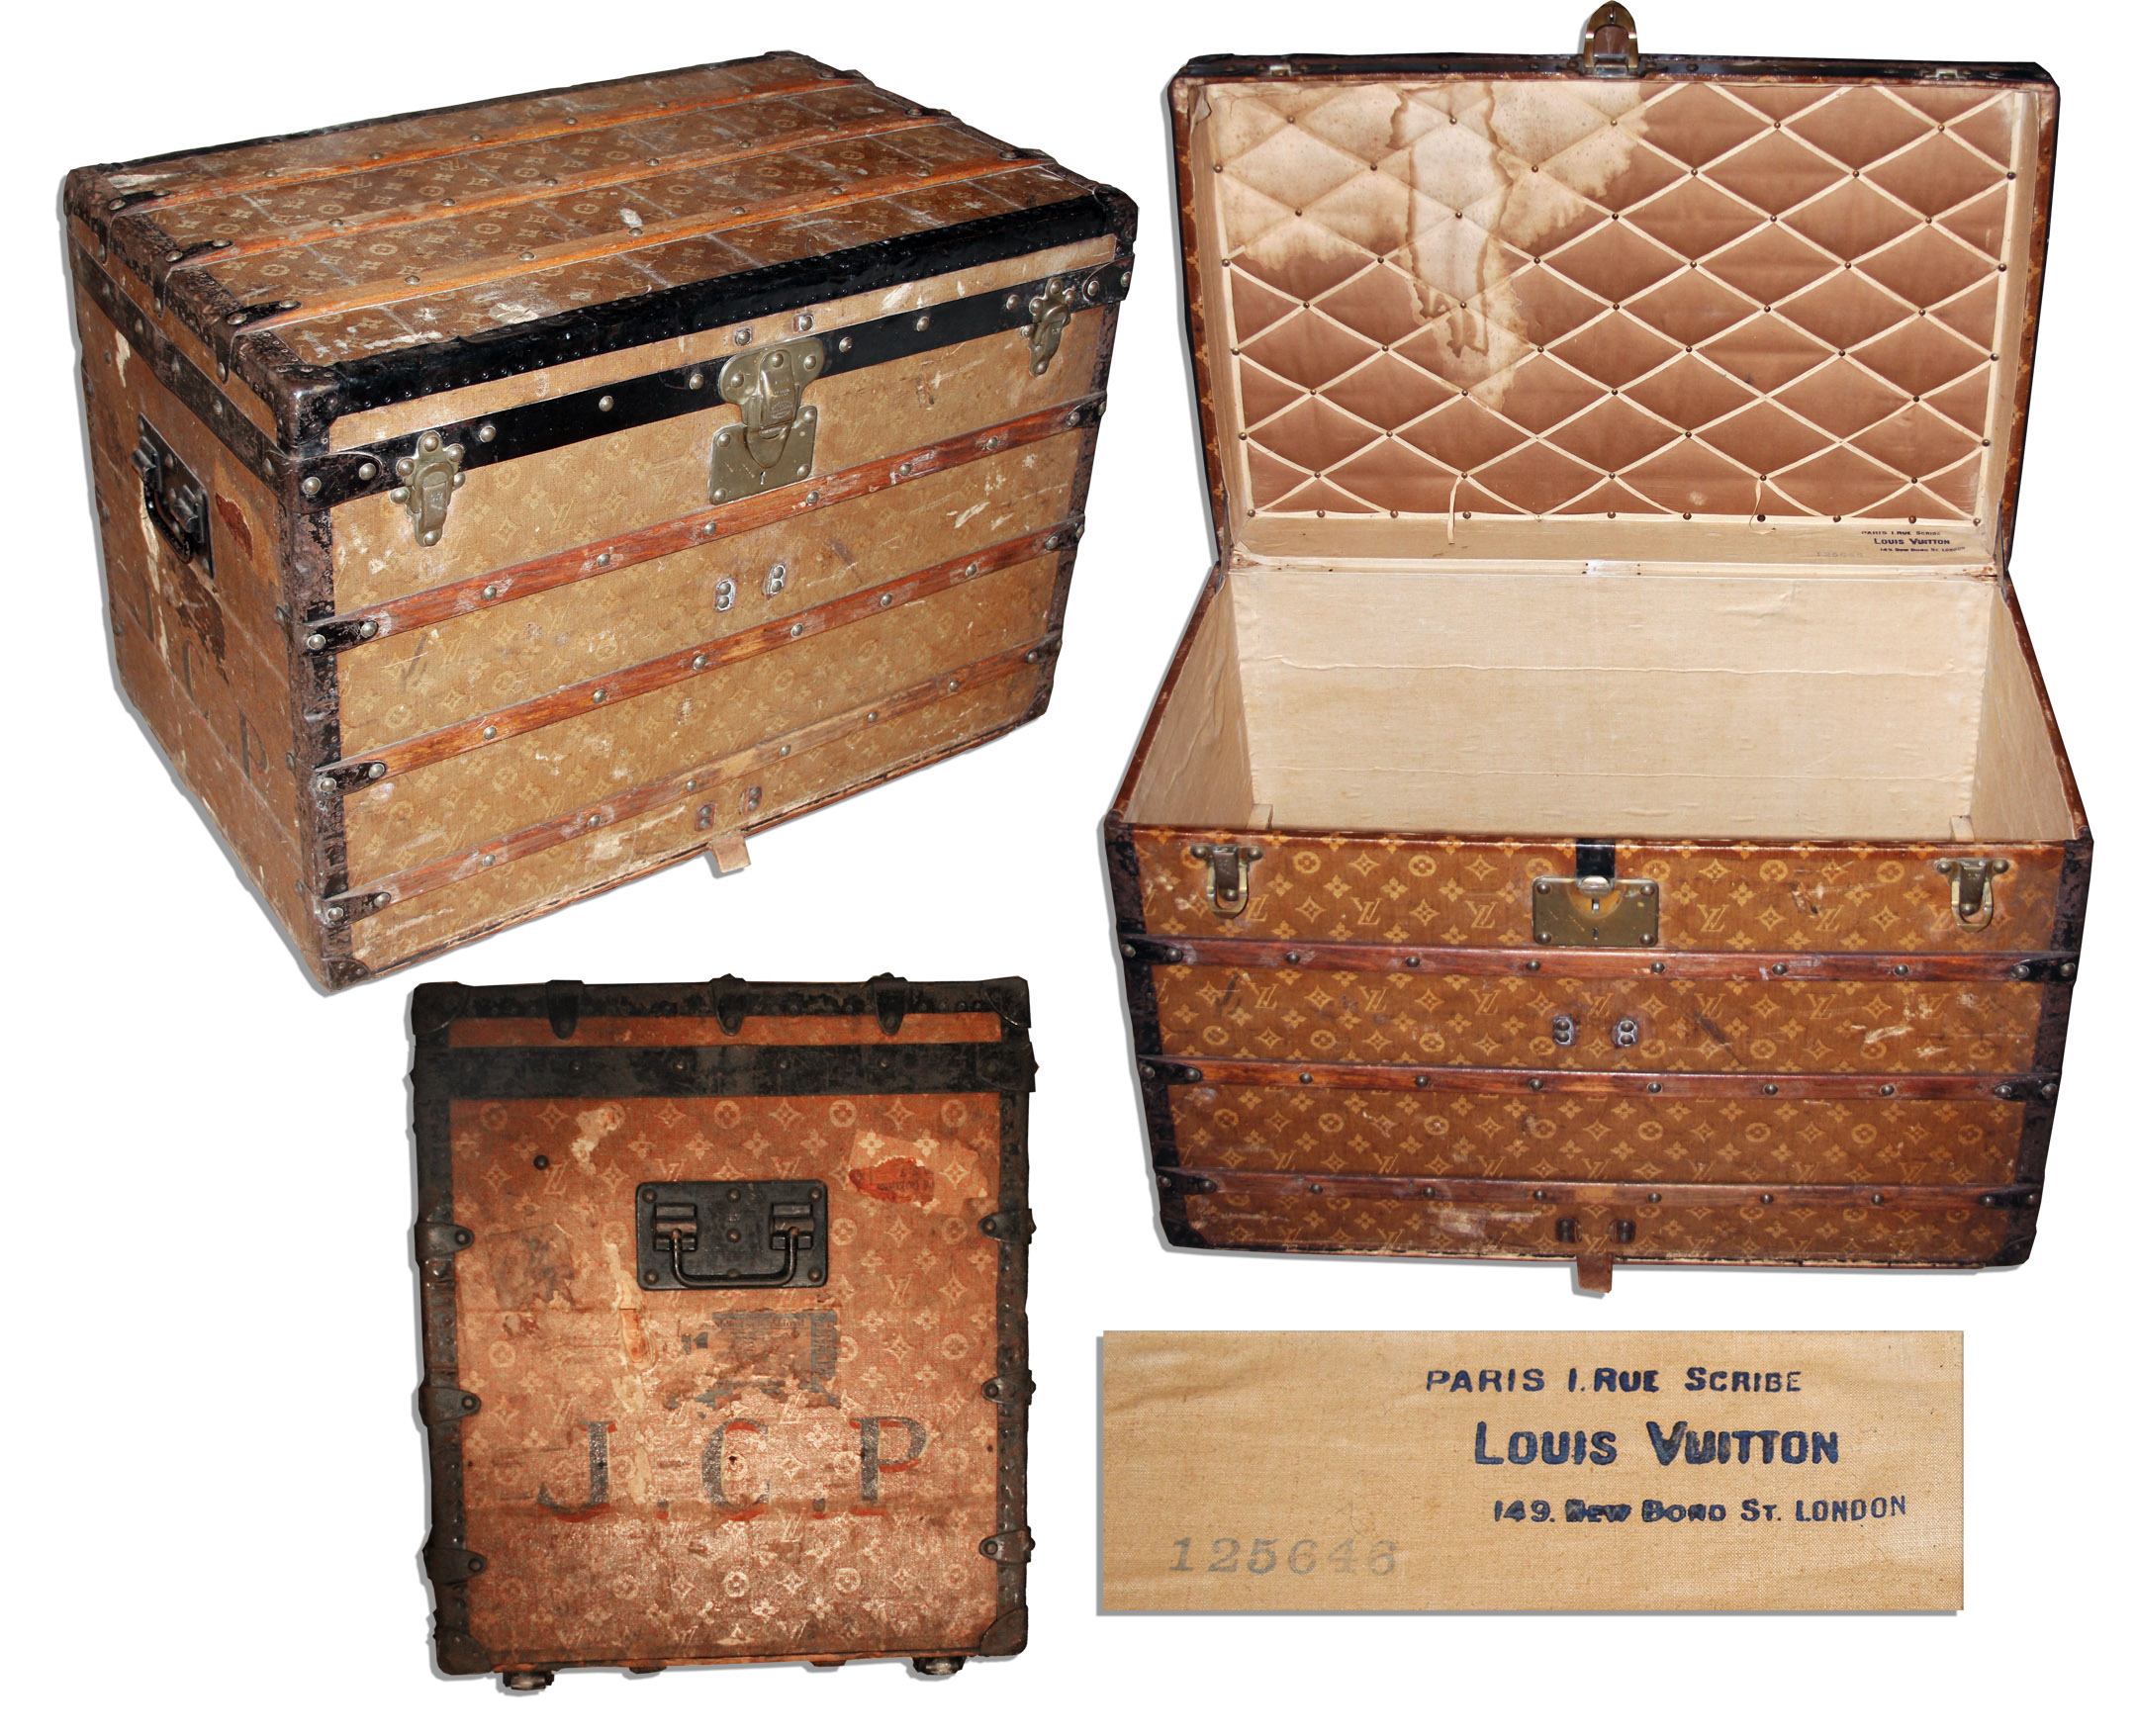 Sell Your Original Louis Vuitton Steamer Trunk at Nate D. Sanders